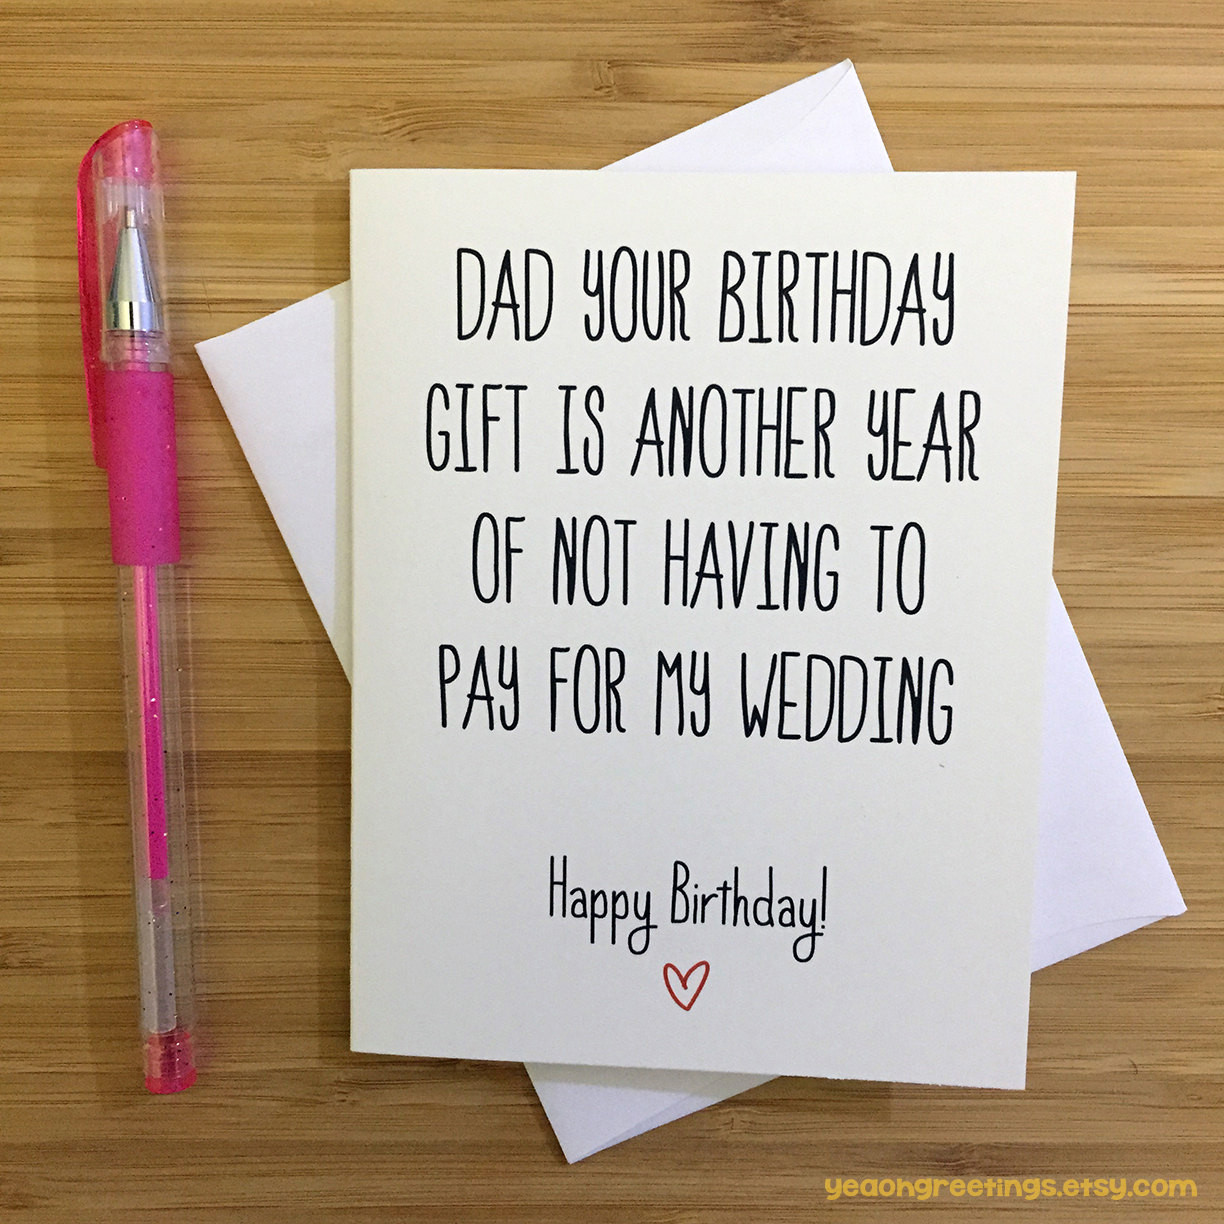 Birthday Cards For Dad
 Happy Birthday Dad Card for Dad Funny Dad Card Gift for